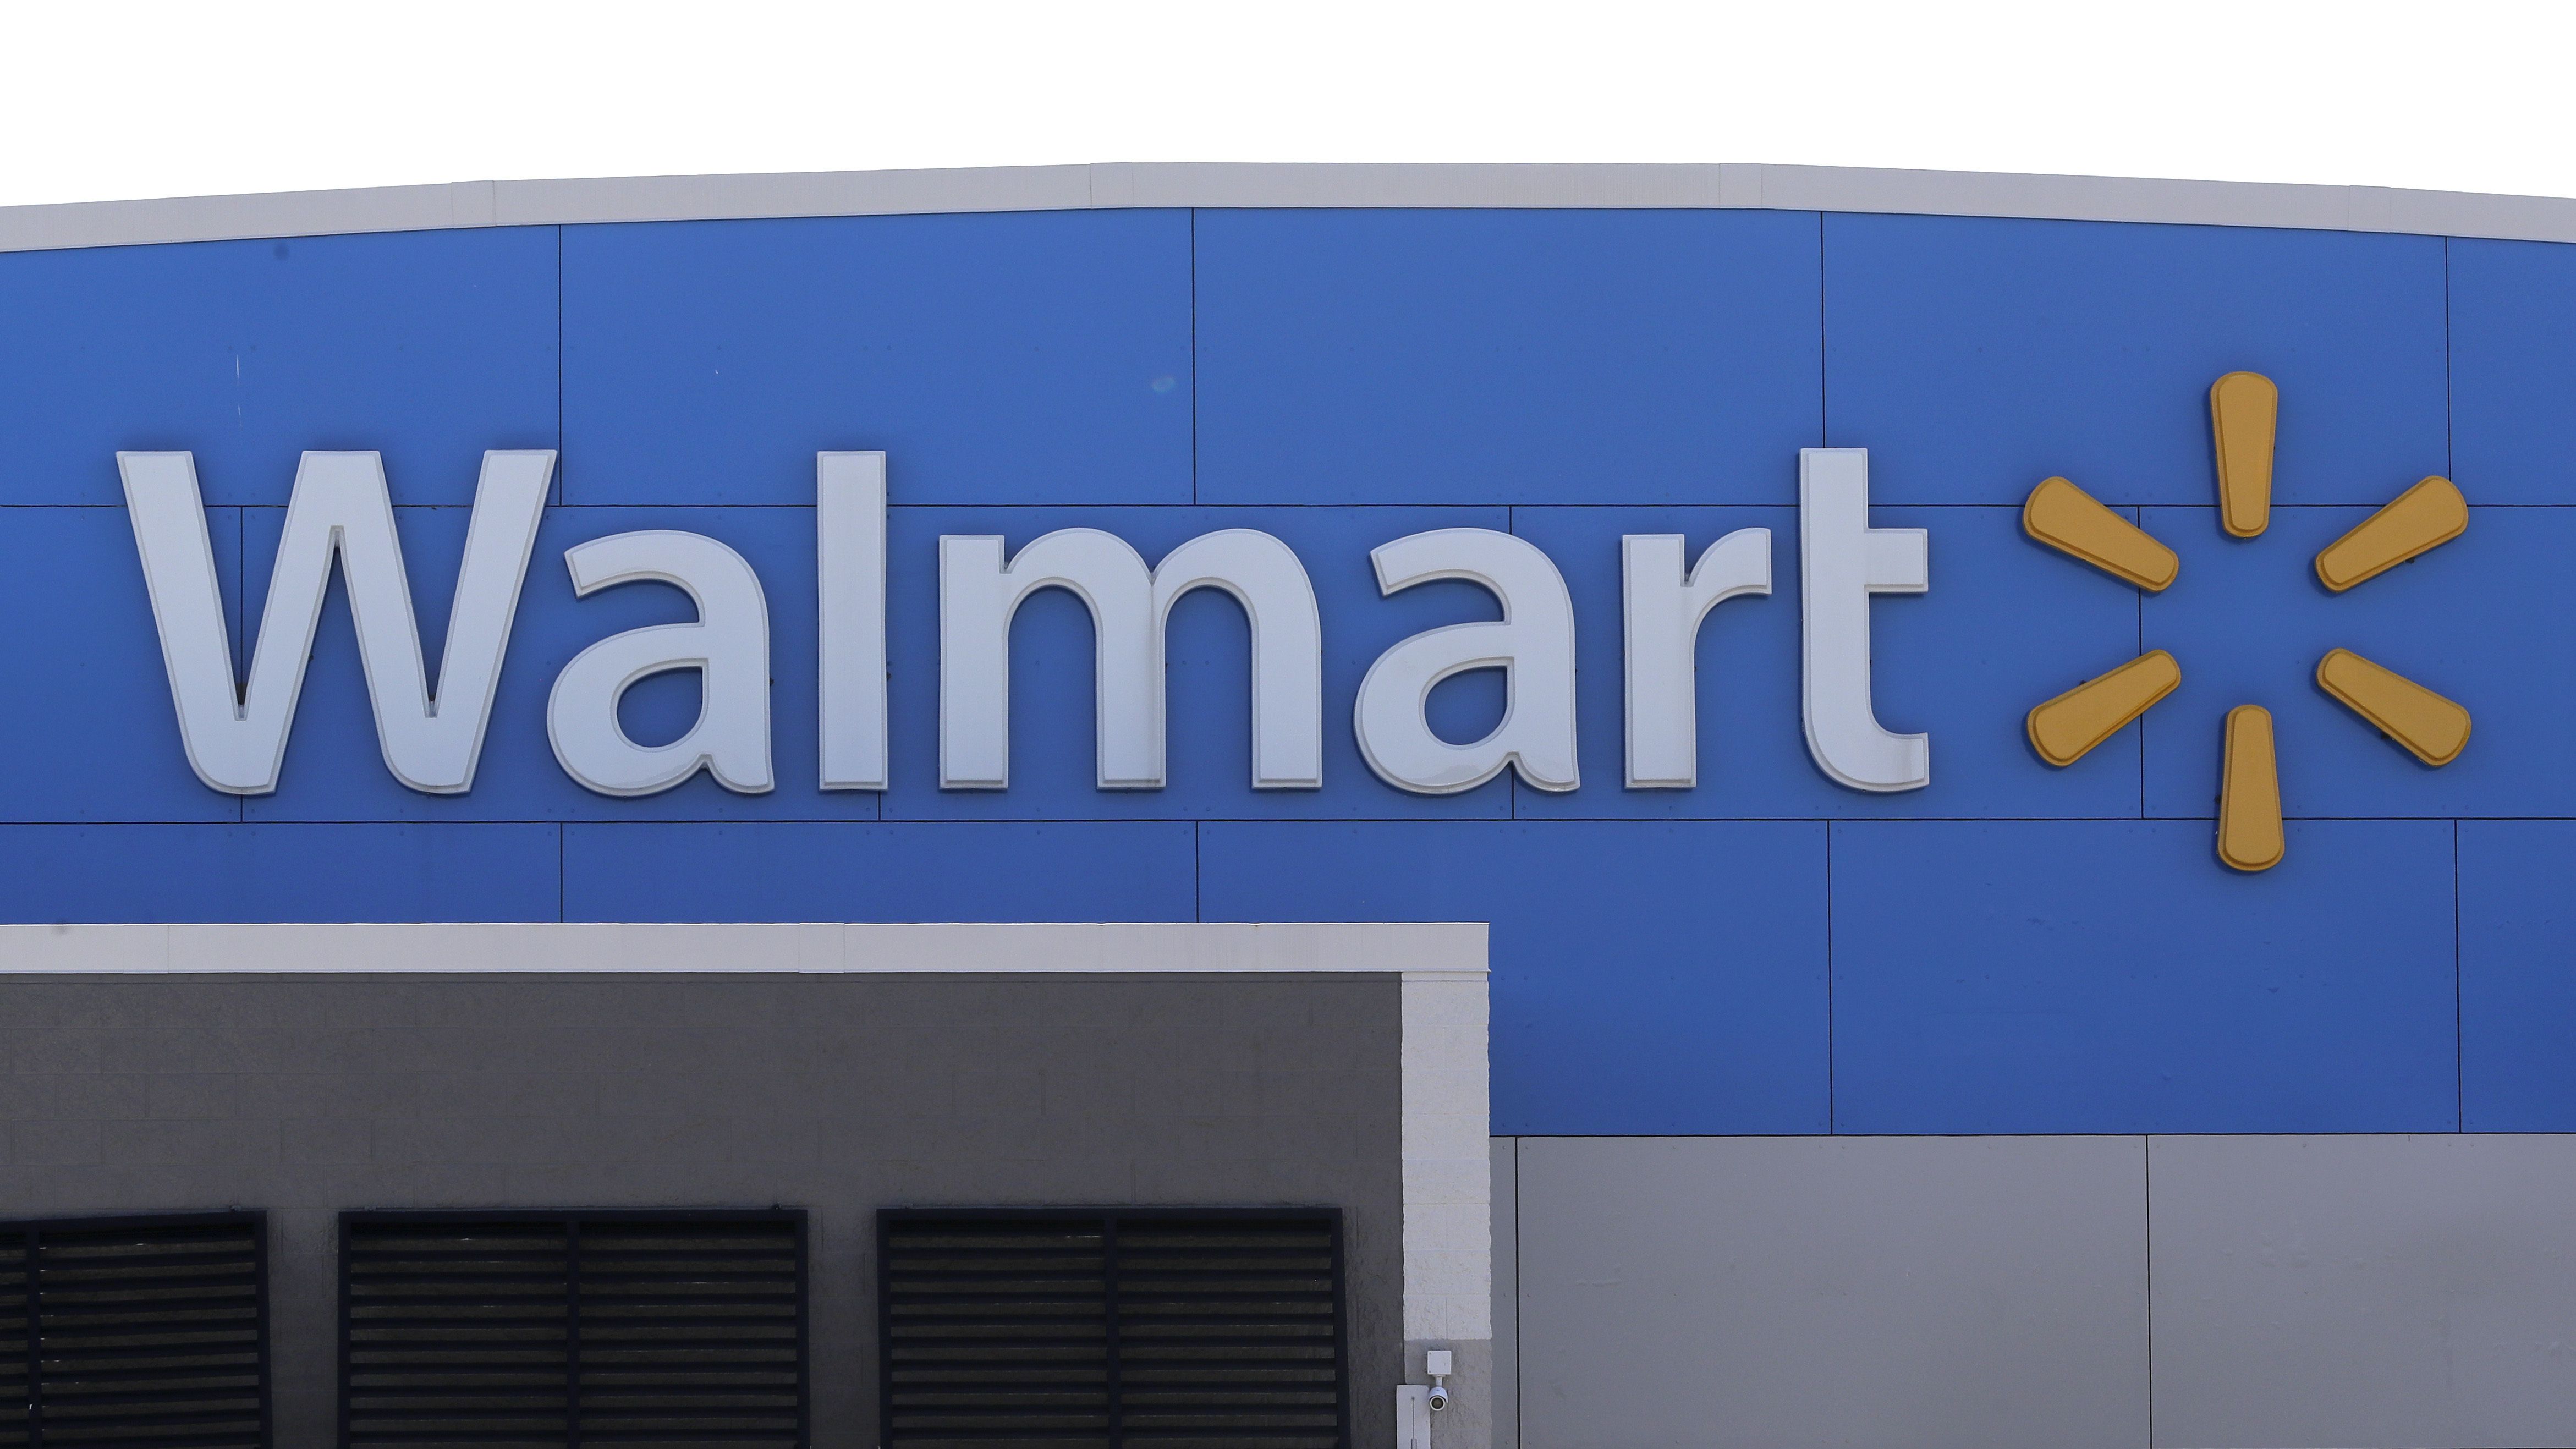 Worcester Walmart closed until Saturday for store cleaning